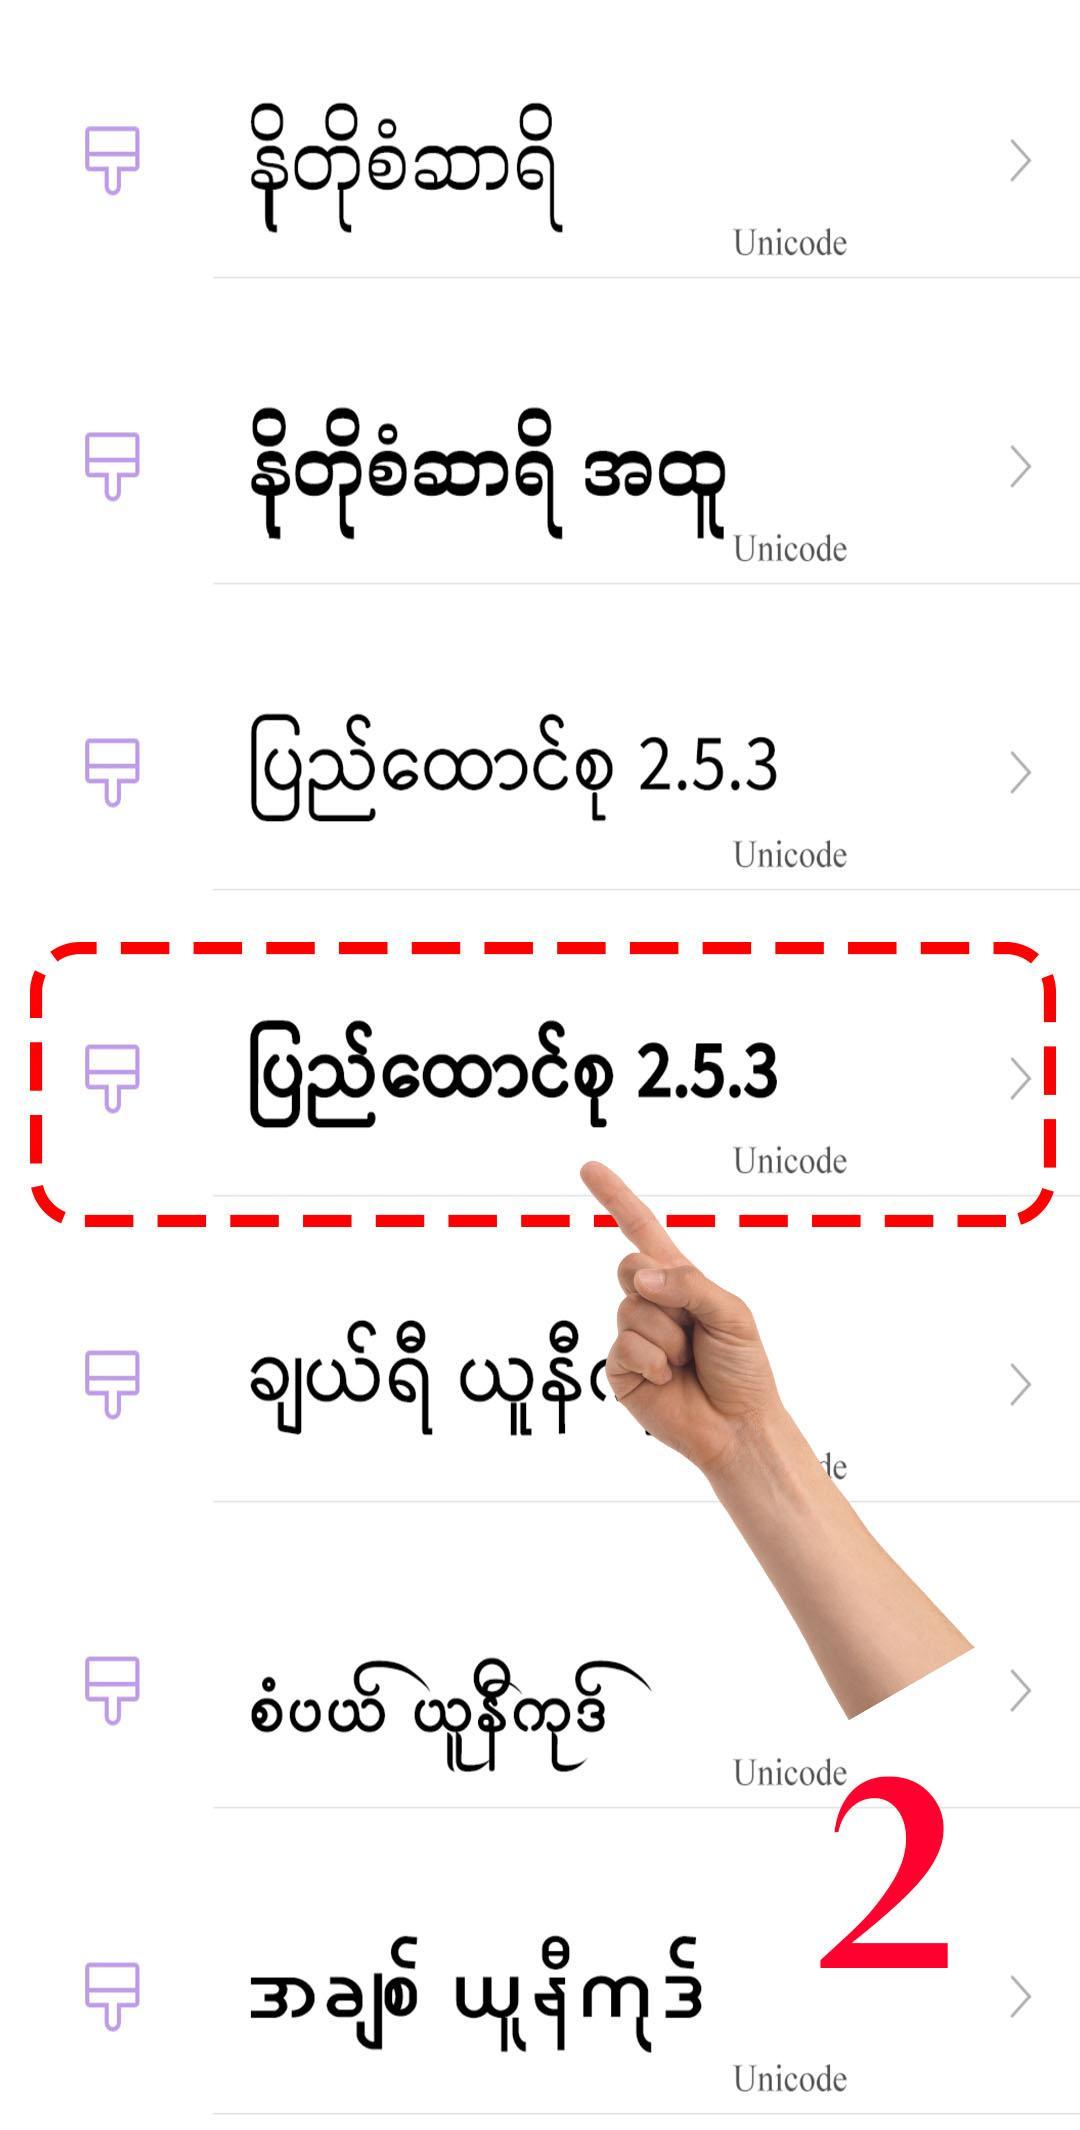 Download zawgyi font for android 5.0